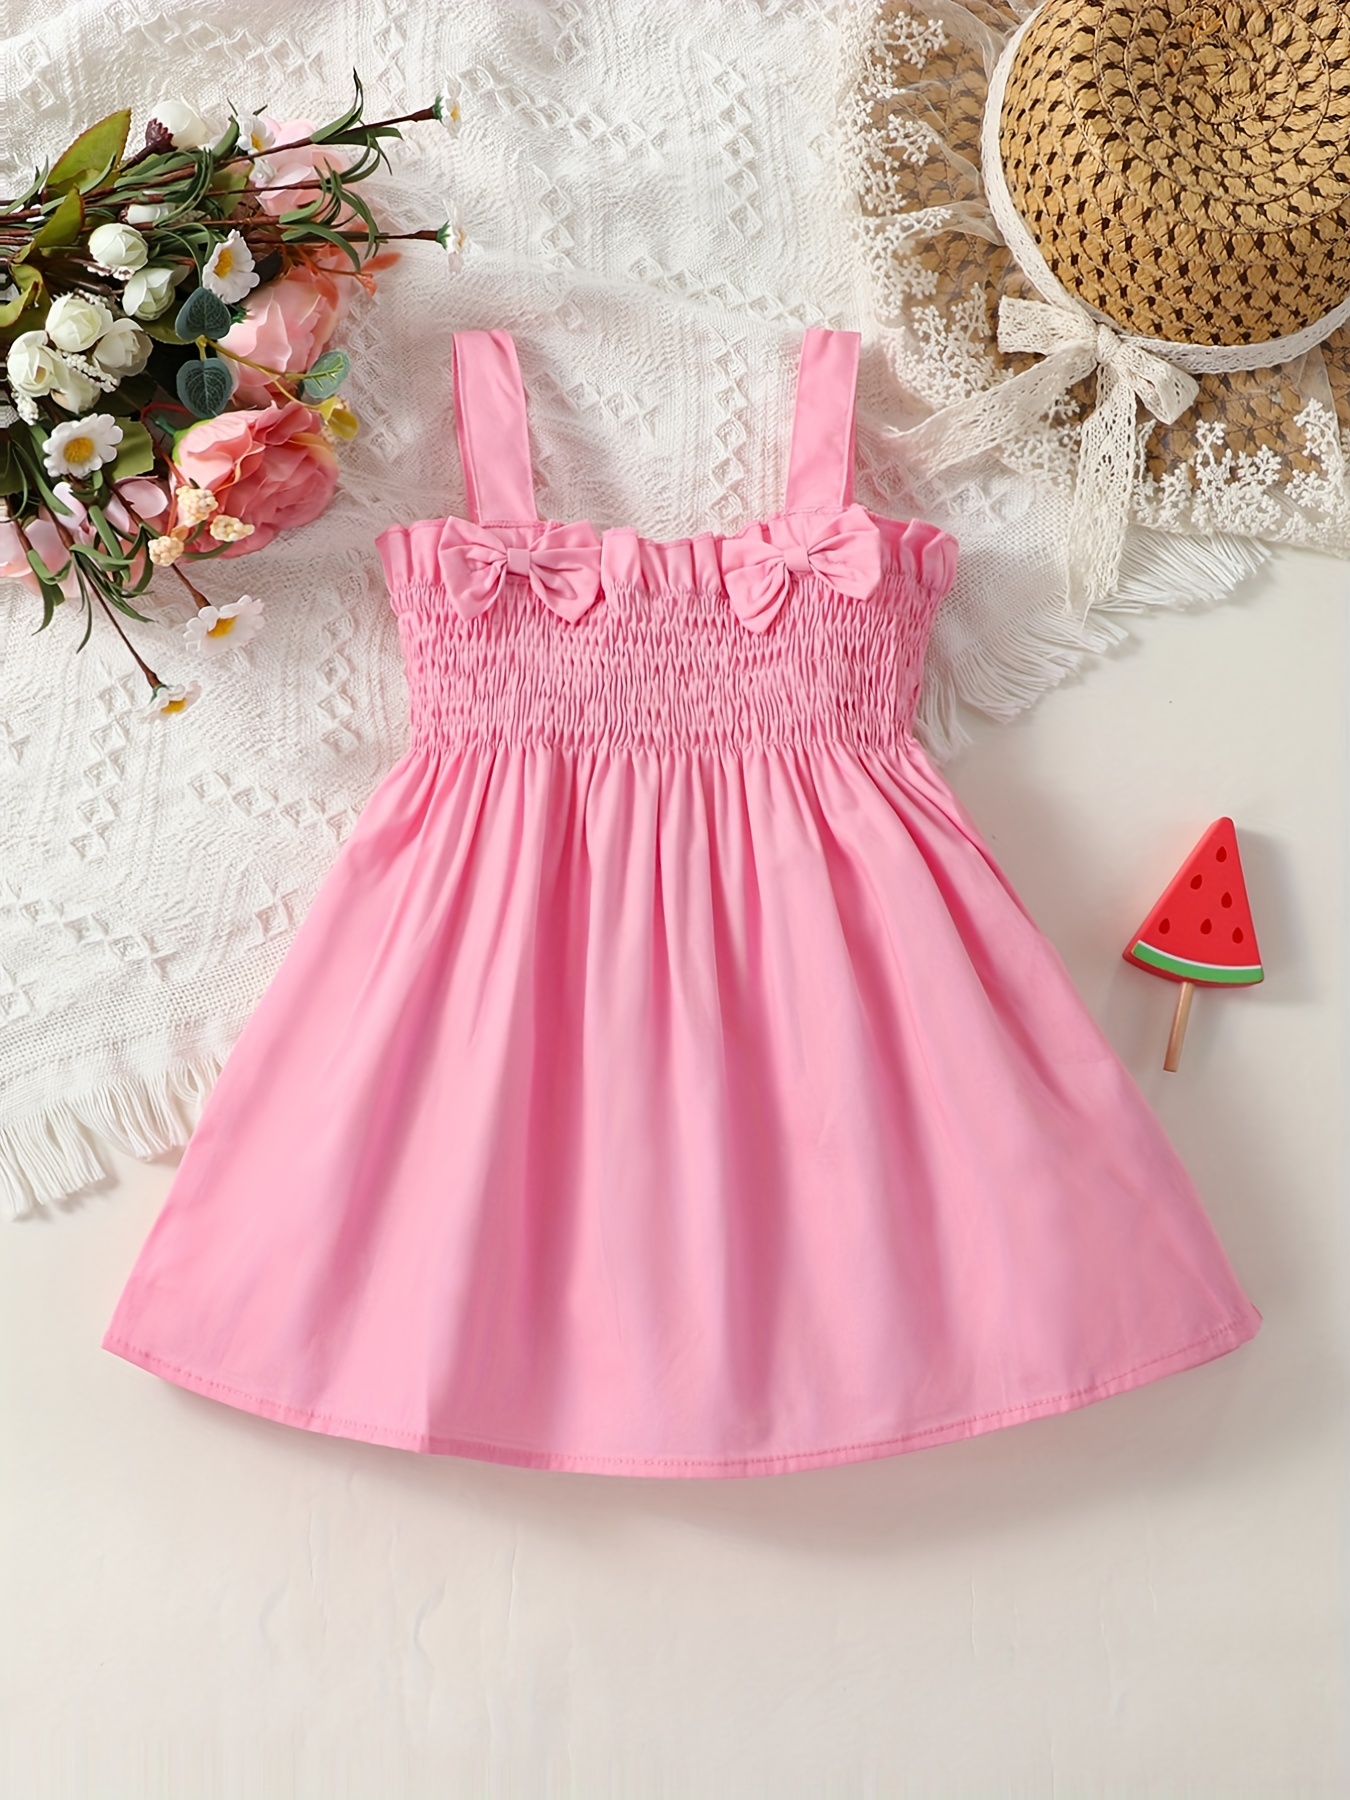 Baby Girls Casual Cute Elastic Bow Suspender Dress For Summer Holiday Party